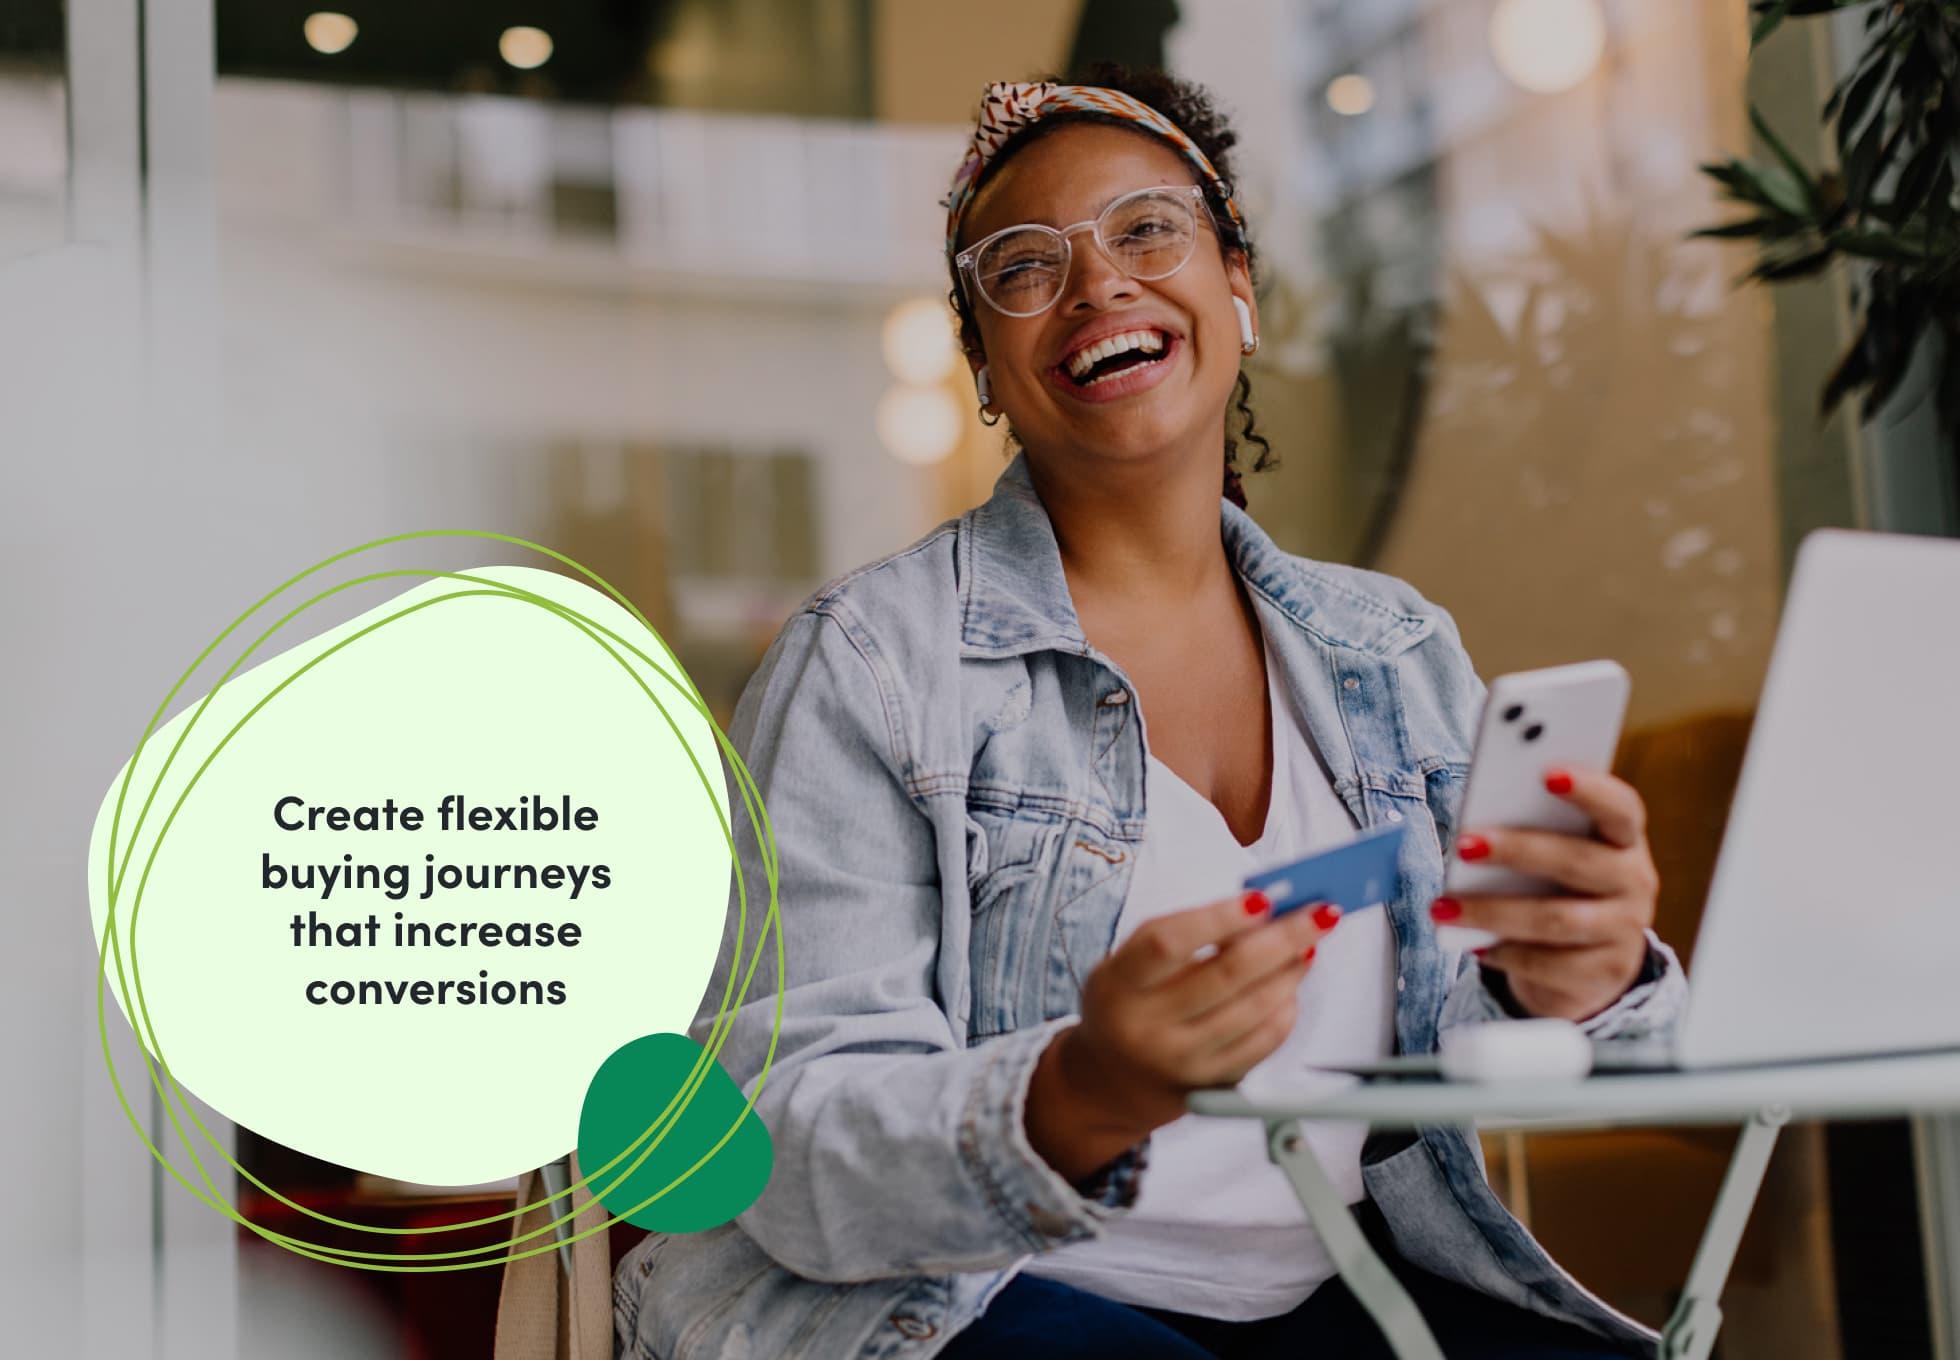 A person sitting with their laptop and smiling, holding their cellphone in one hand and a credit card in another. The imposed text reads "Create flexible buying journeys that increase conversions."